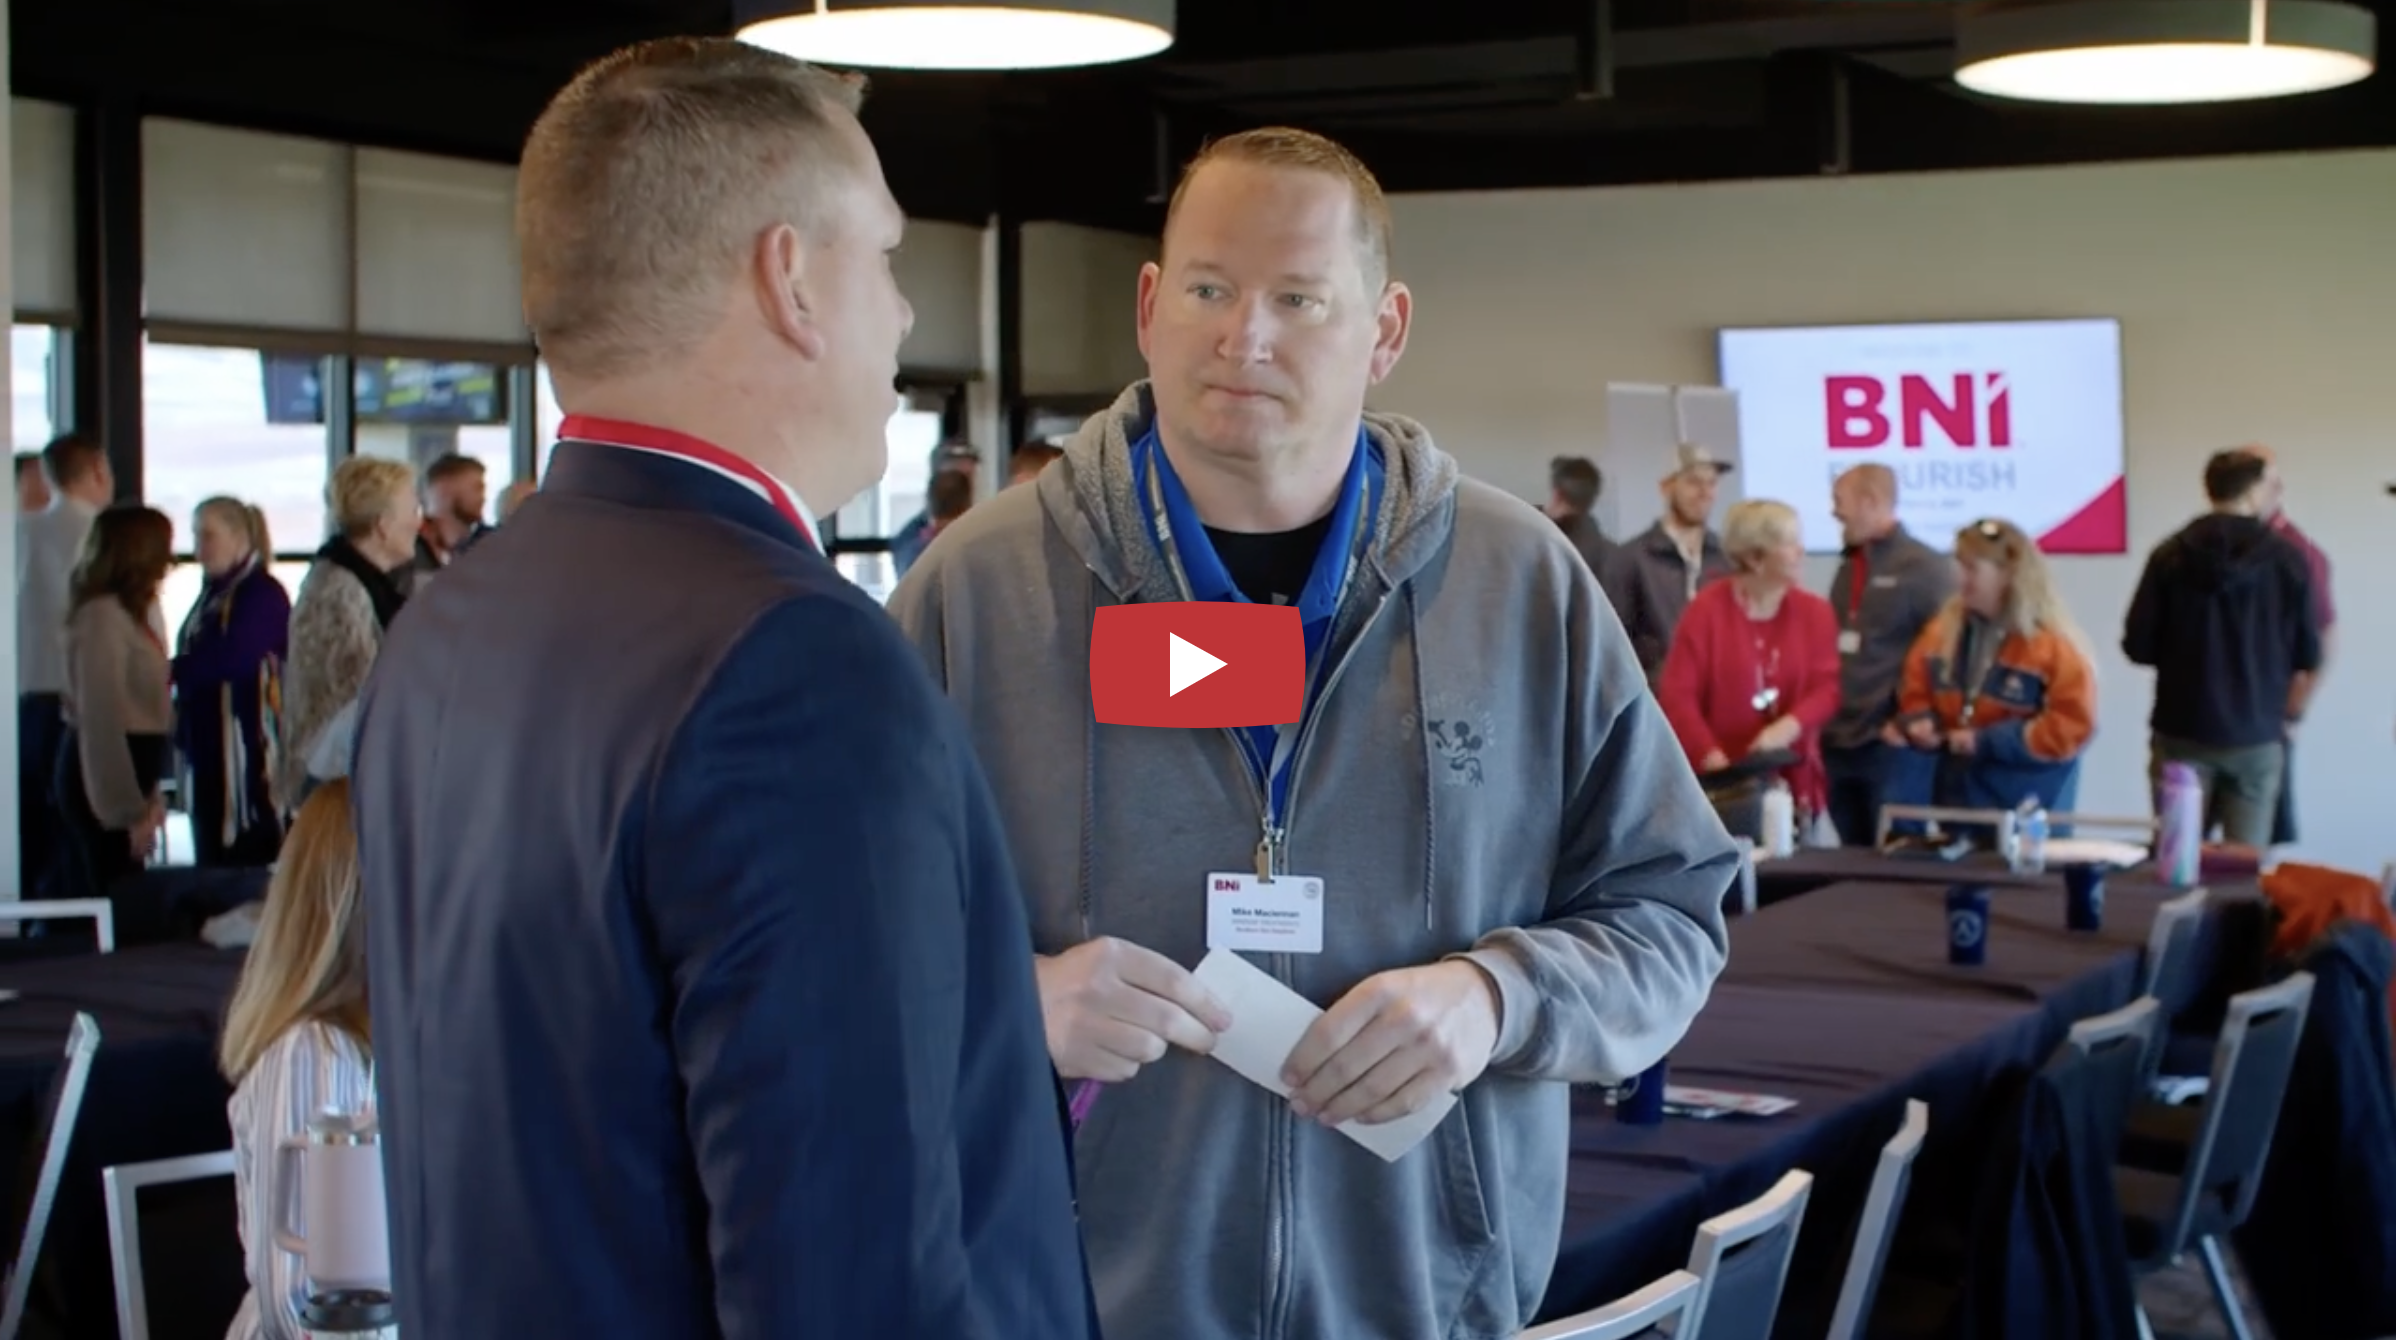 BNI Intro Video - Share with people who want to know more